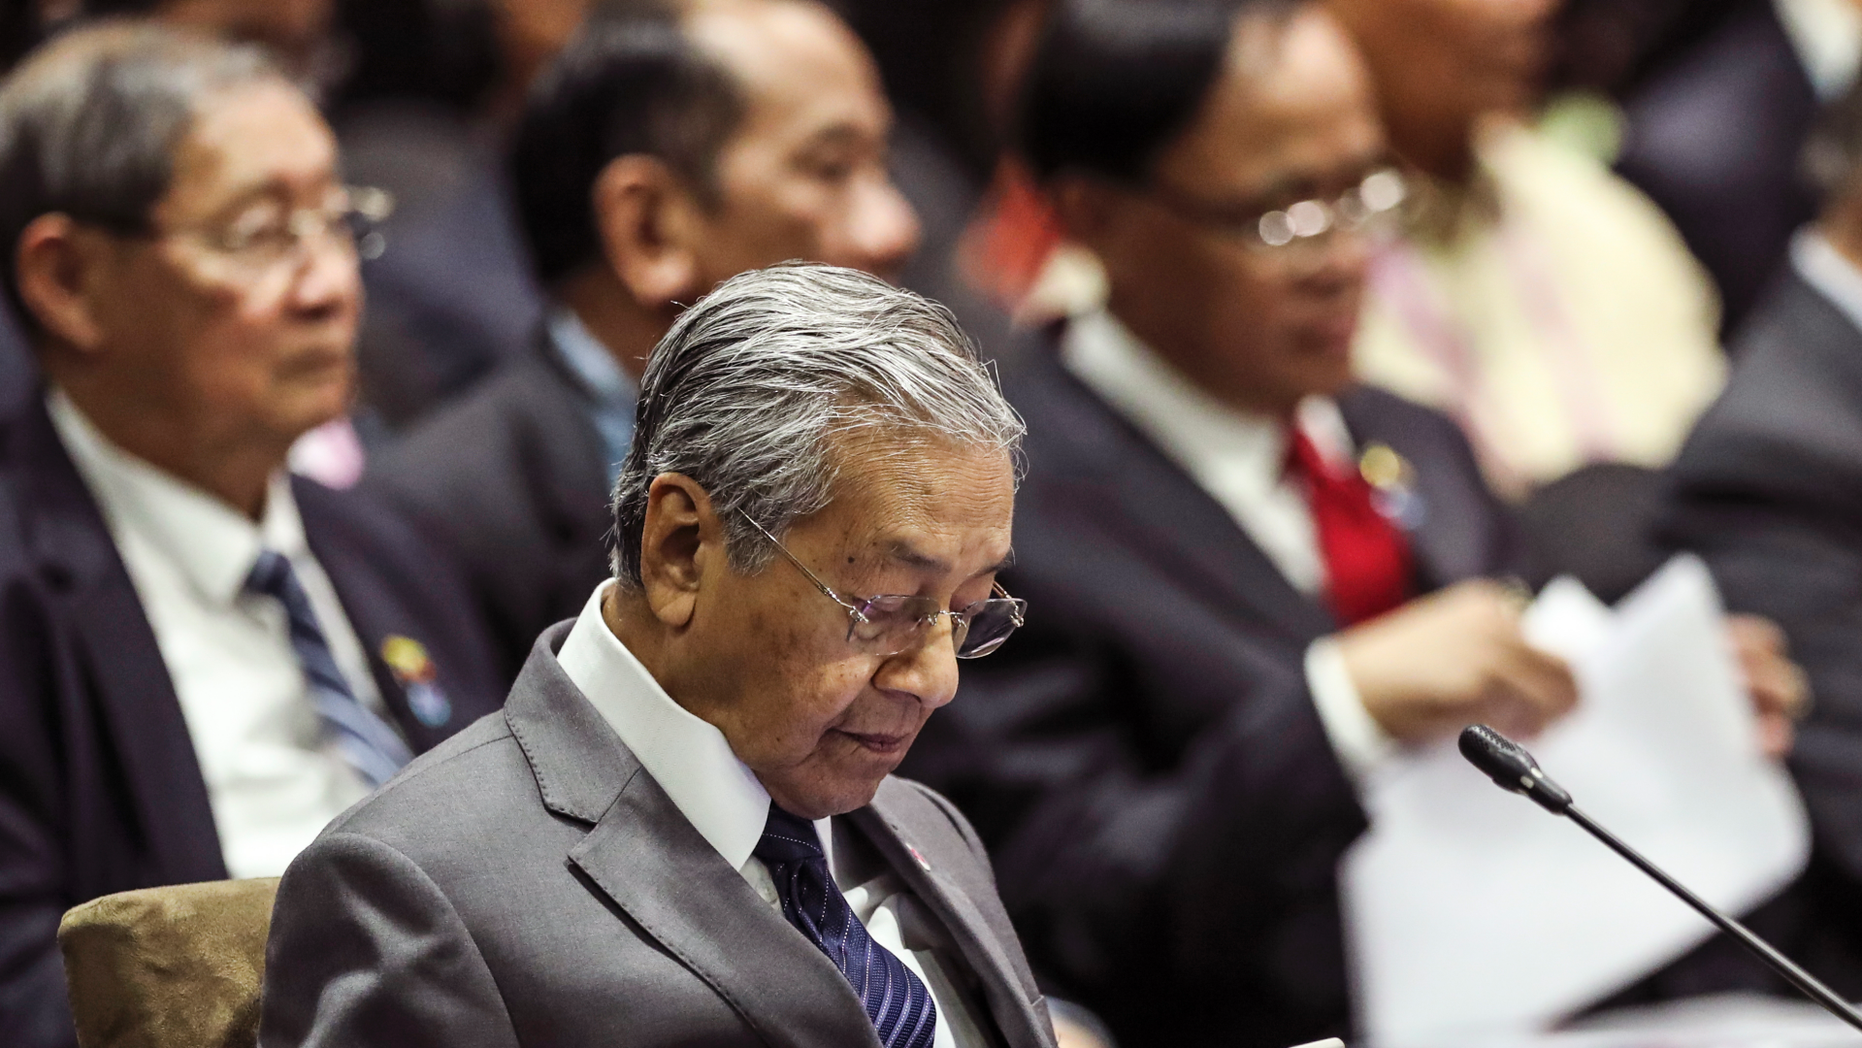 Malaysian Prime Minister Mahathir Mohamad uses his mobile phone during the 13th East Asian Summit Plenary on the sidelines of the 33rd ASEAN summit in Singapore, Thursday, Nov. 15, 2018. At 93, Malaysia’s comeback prime minister, Mahathir Mohamed, cuts a striking figure as the center of attention at a Southeast Asian summit in Singapore. (AP Photo/Yong Teck Lim)